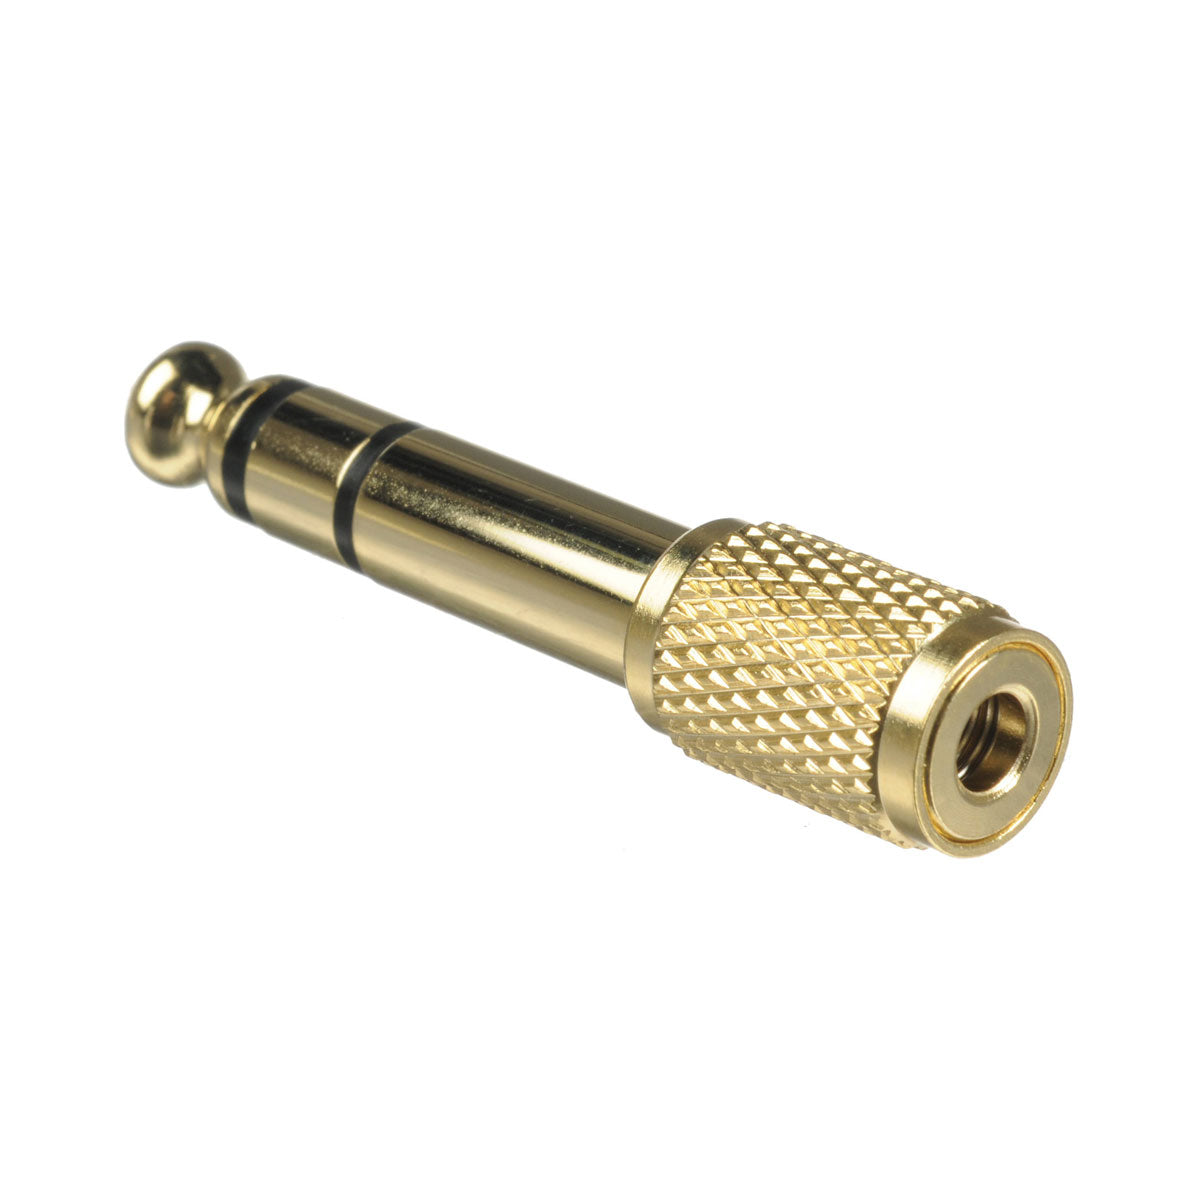 Sennheiser Spares - Adapter Jack 6.3 Gold-Plated, Pluggable